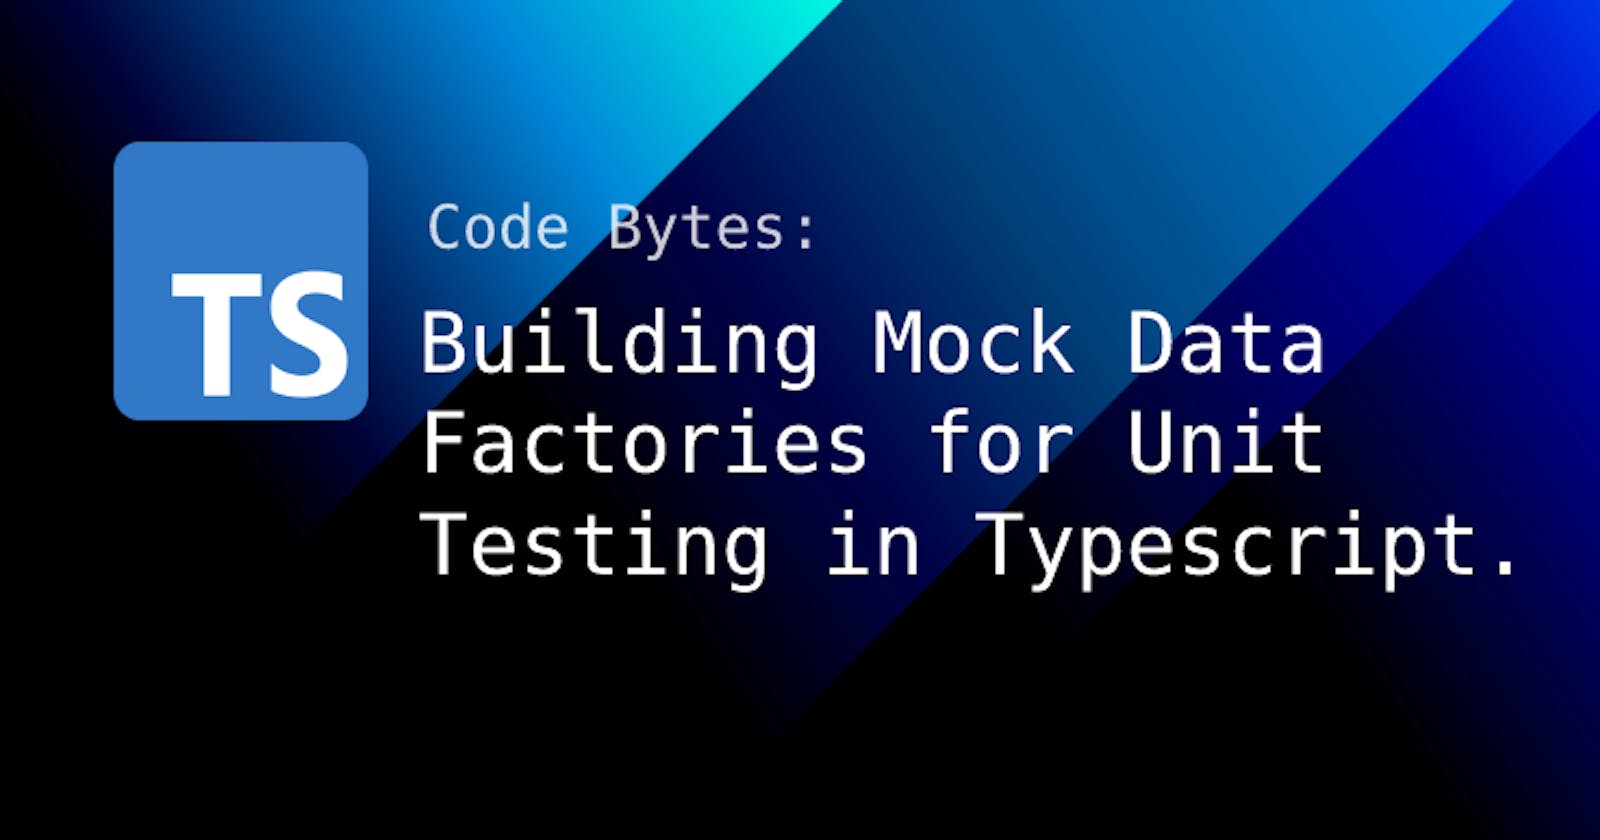 Building Mock Data Factories for Unit Testing in Typescript.